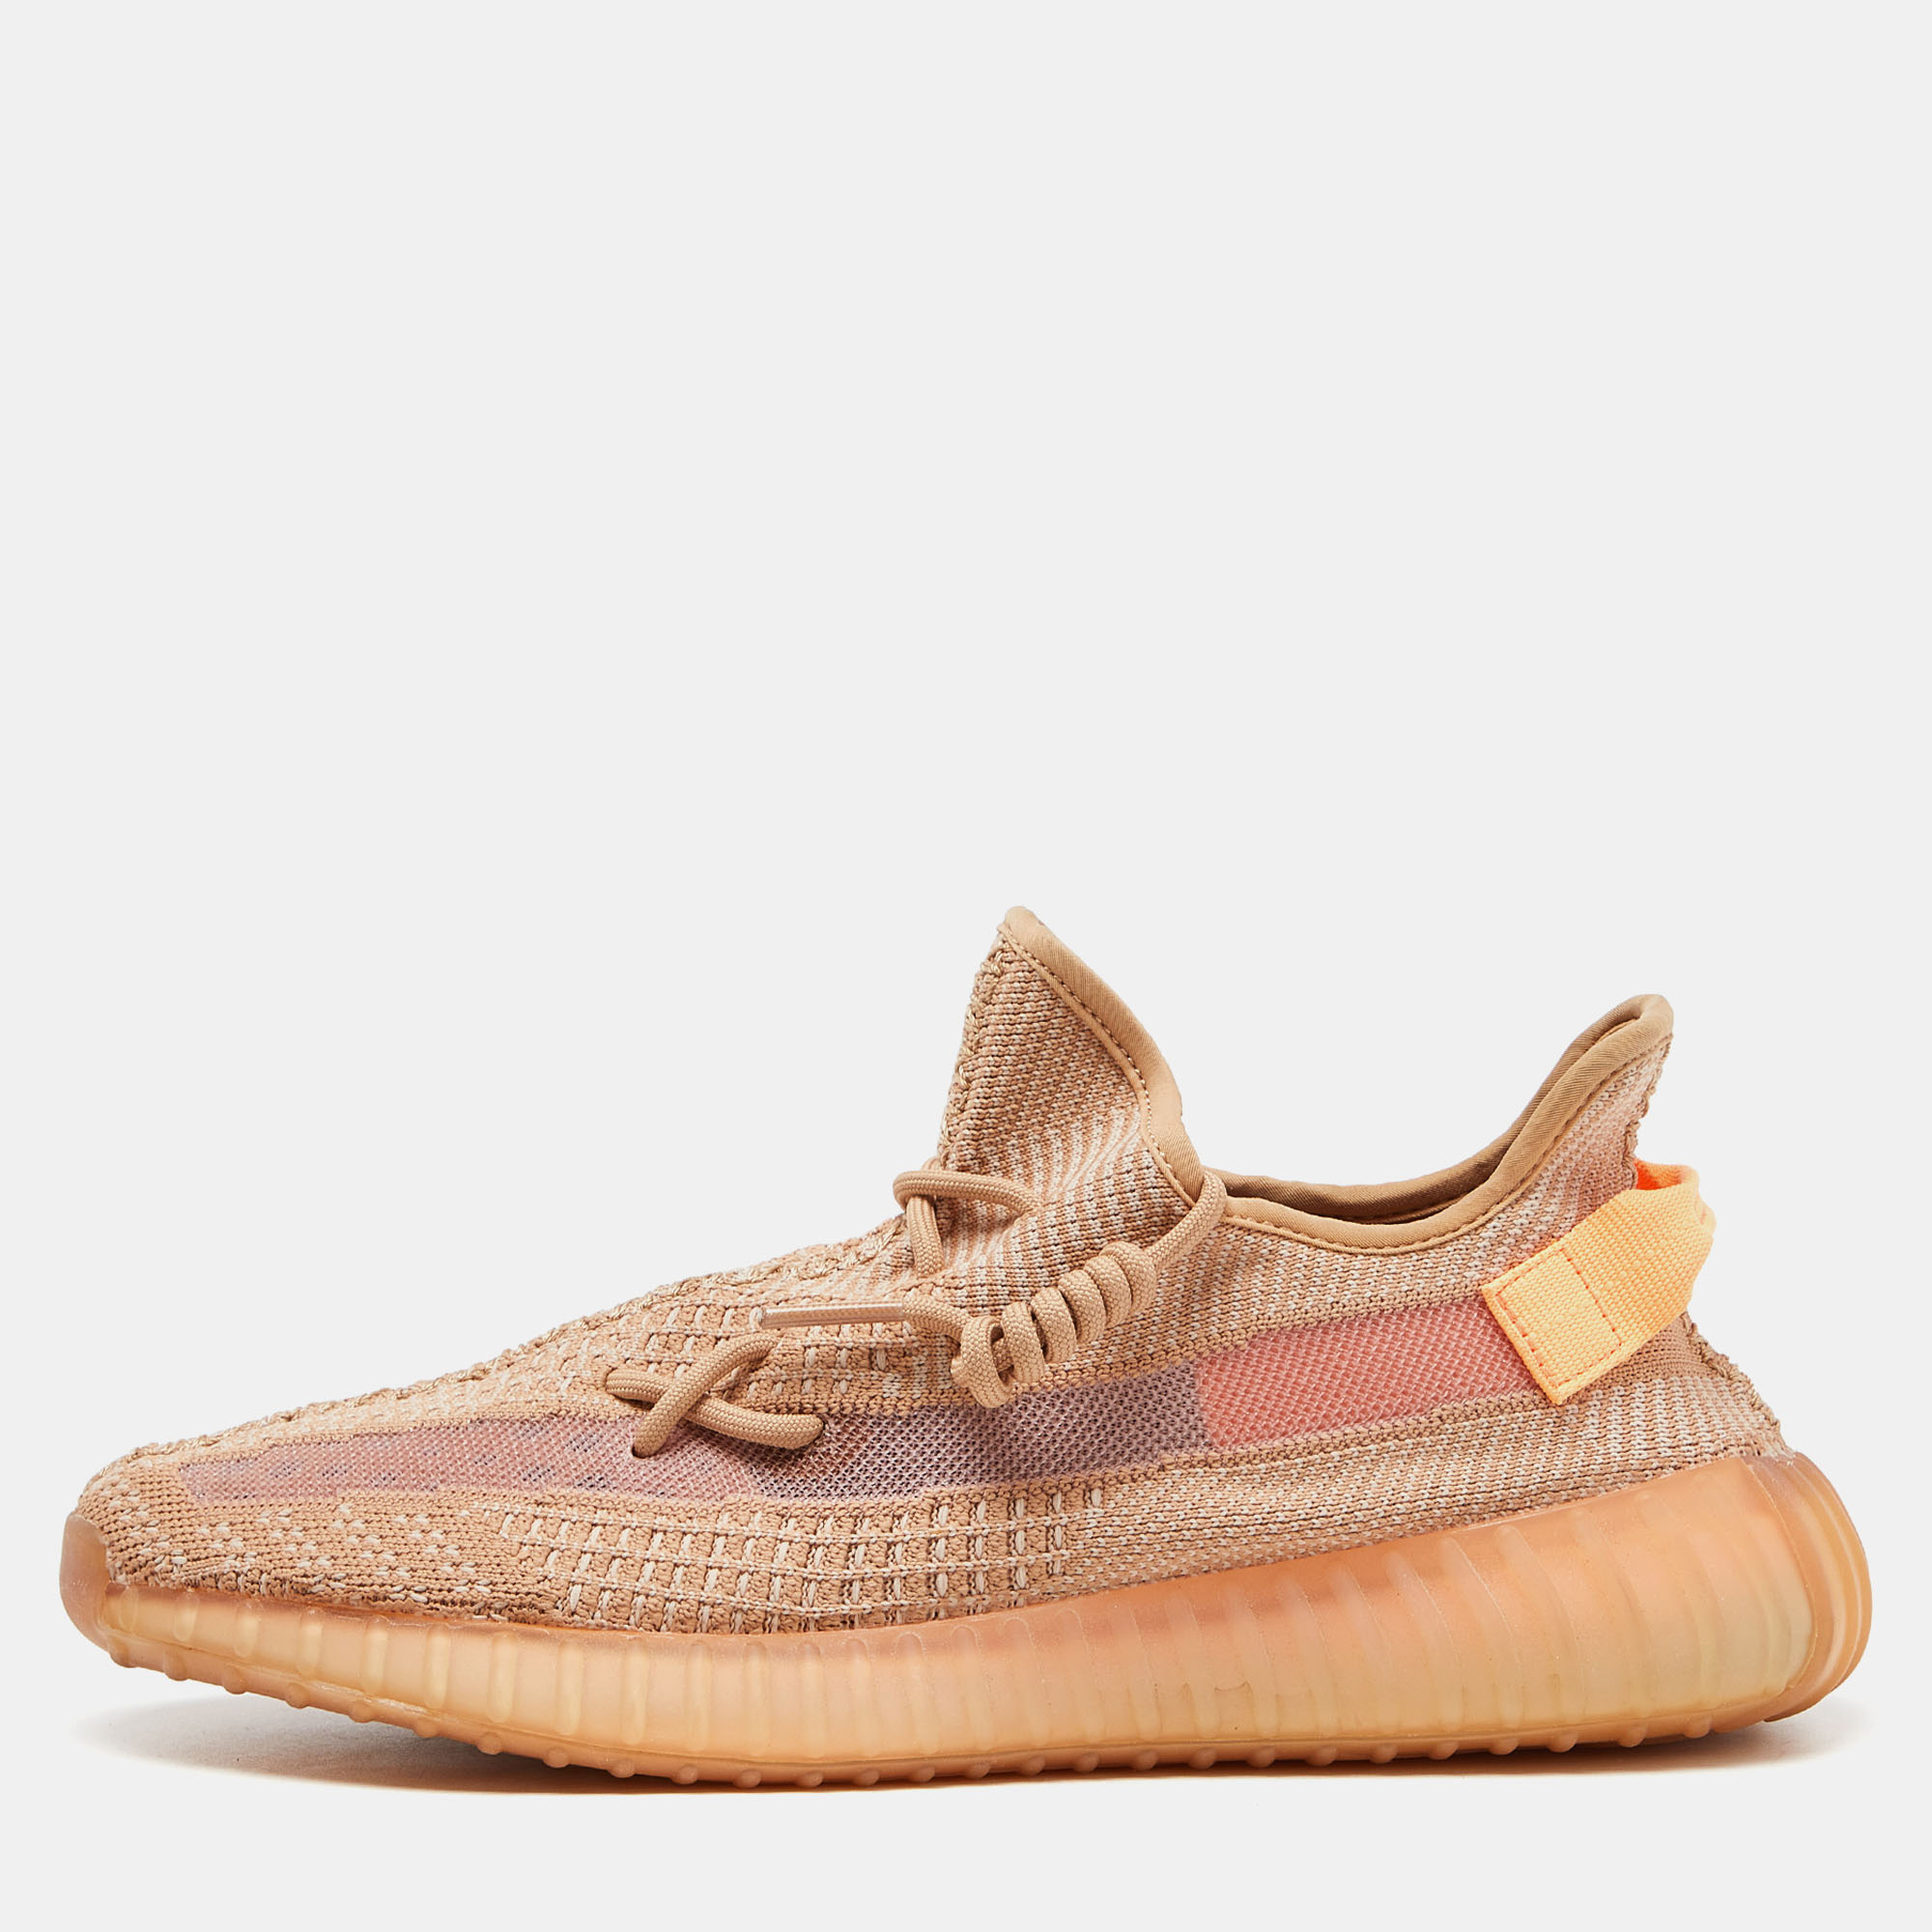 

Yeezy x Adidas Orange Knit Fabric Boost 350 V2 Clay Sneakers Size